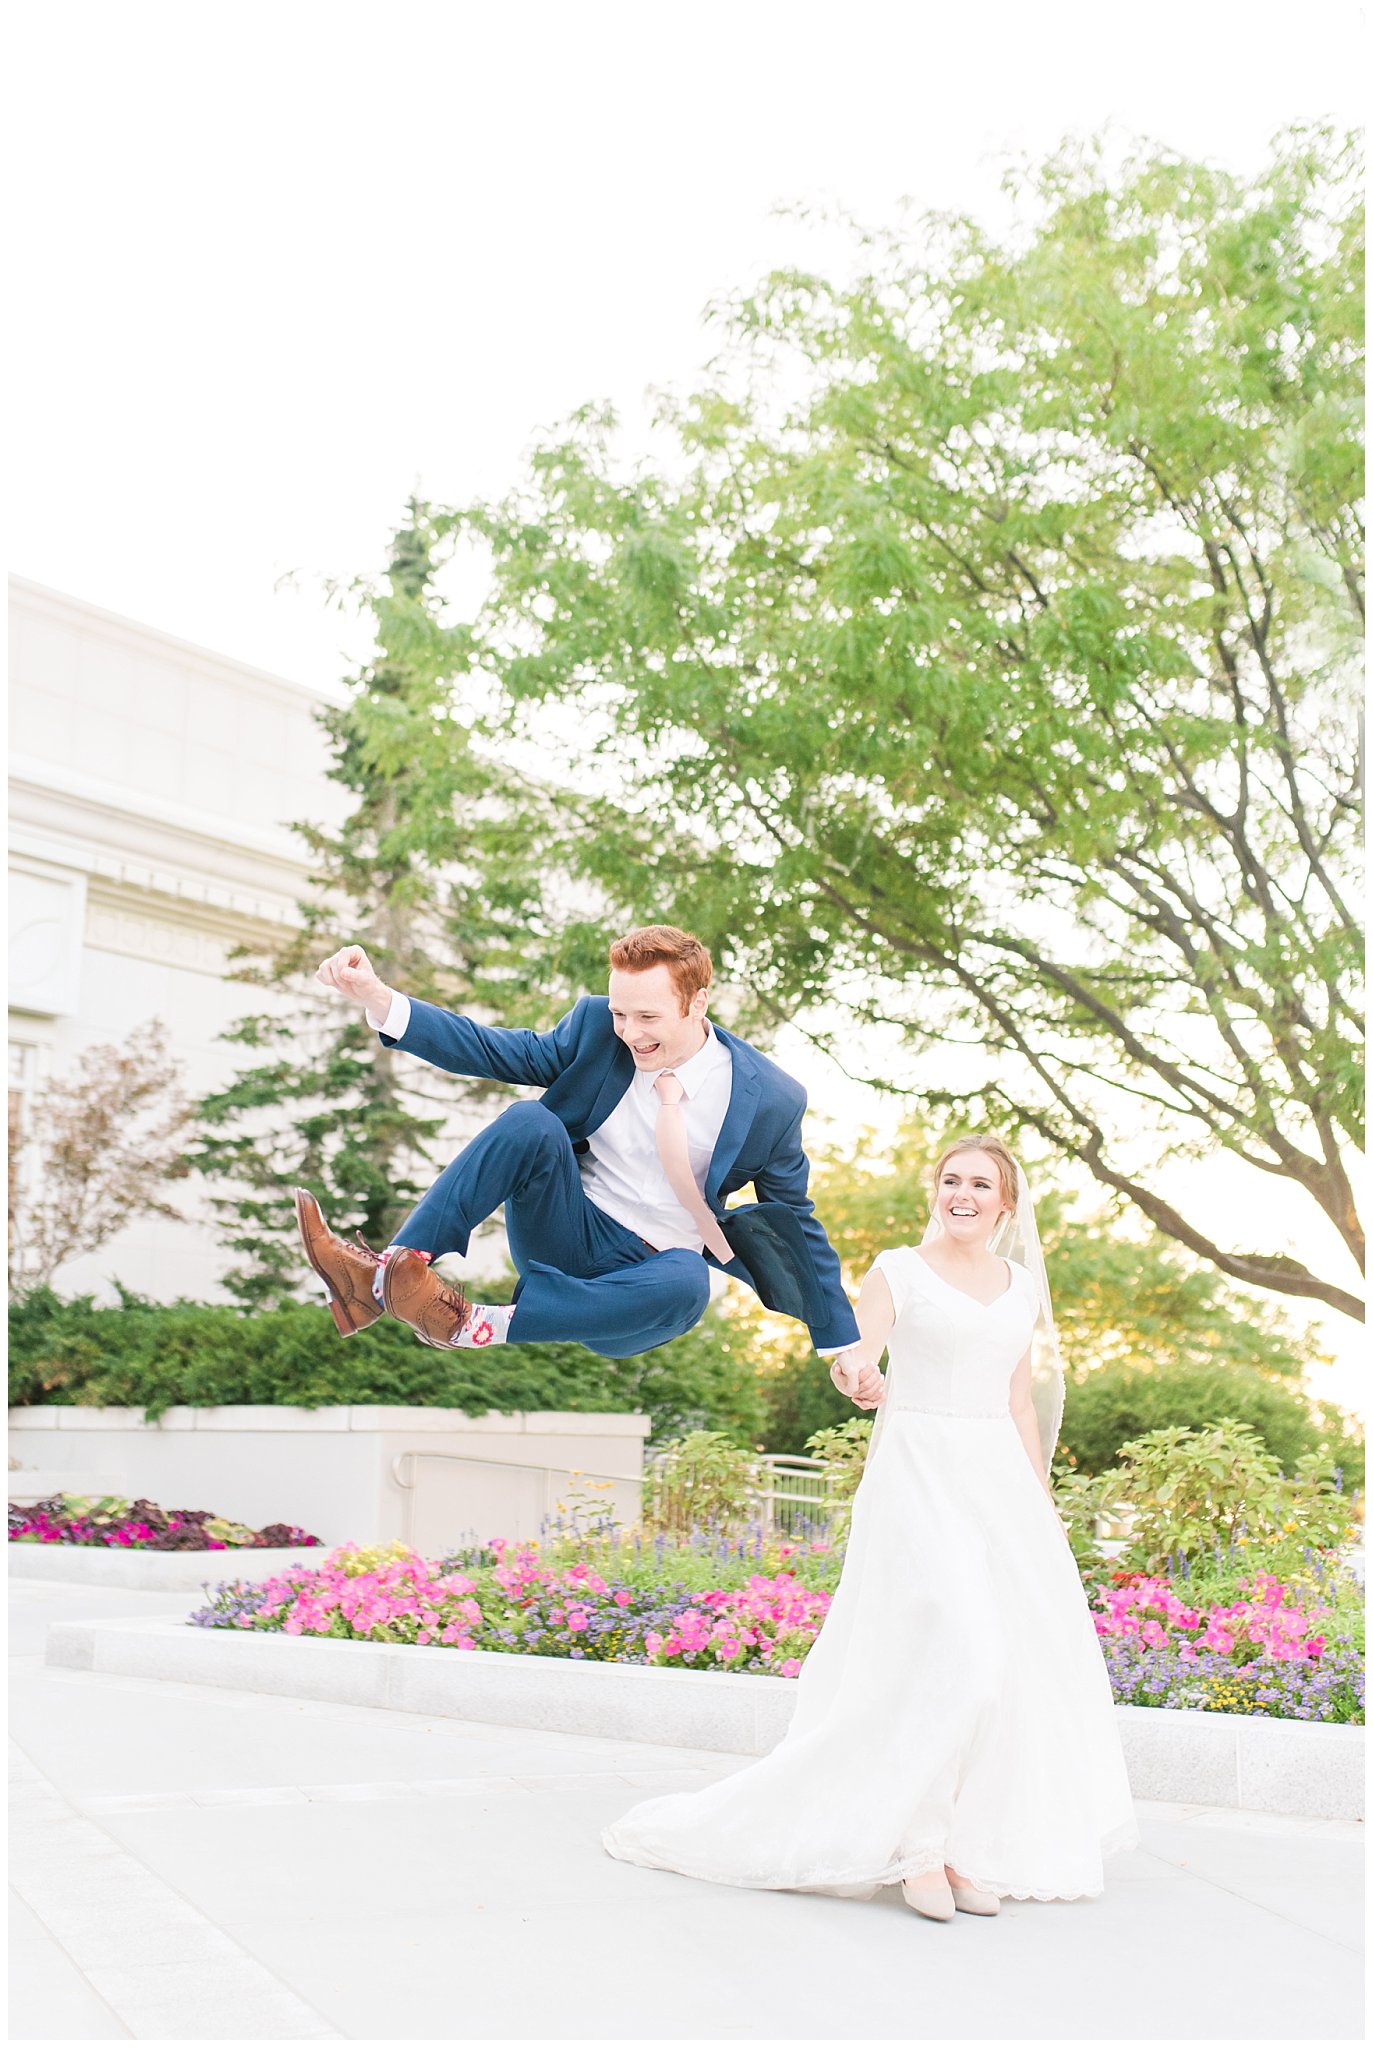 Groom heel click with bride | Bride and groom portraits with bride in simple elegant dress and veil, and groom in blue suit with blush tie at the Bountiful Temple | Bountiful Temple Summer Formal Session | Utah Weddings | Jessie and Dallin Photography